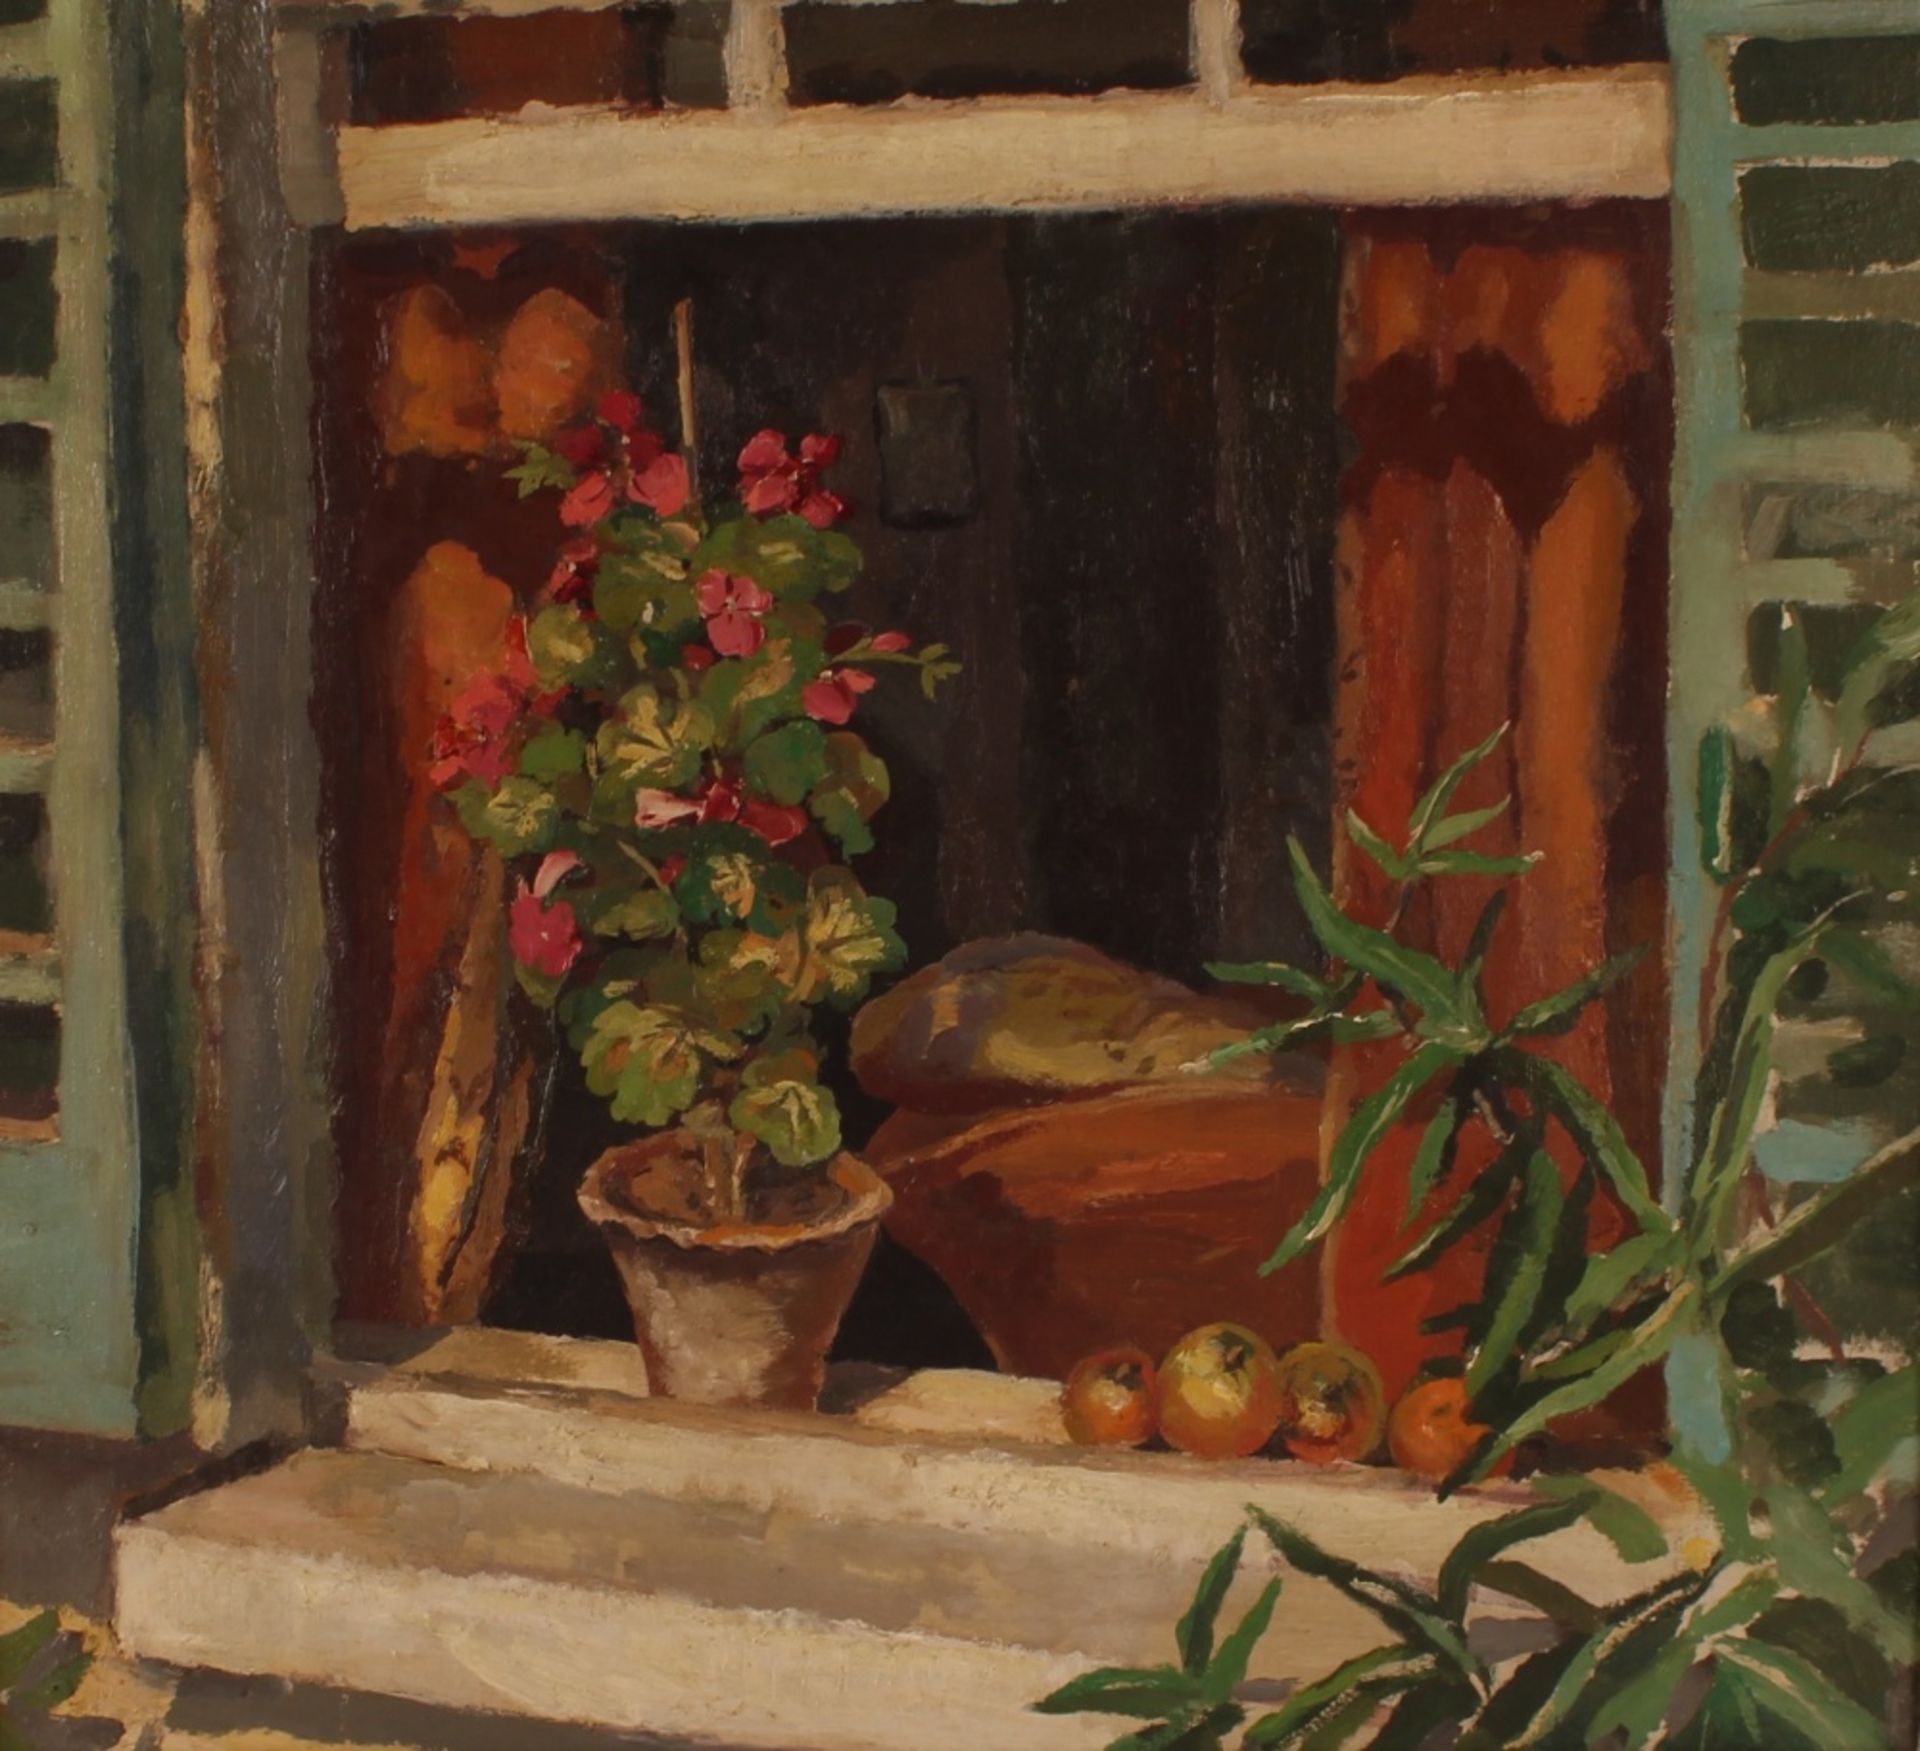 Attributed to Allan Walton, study off lowers and fruit on a window ledge, unsigned oil on canvas,